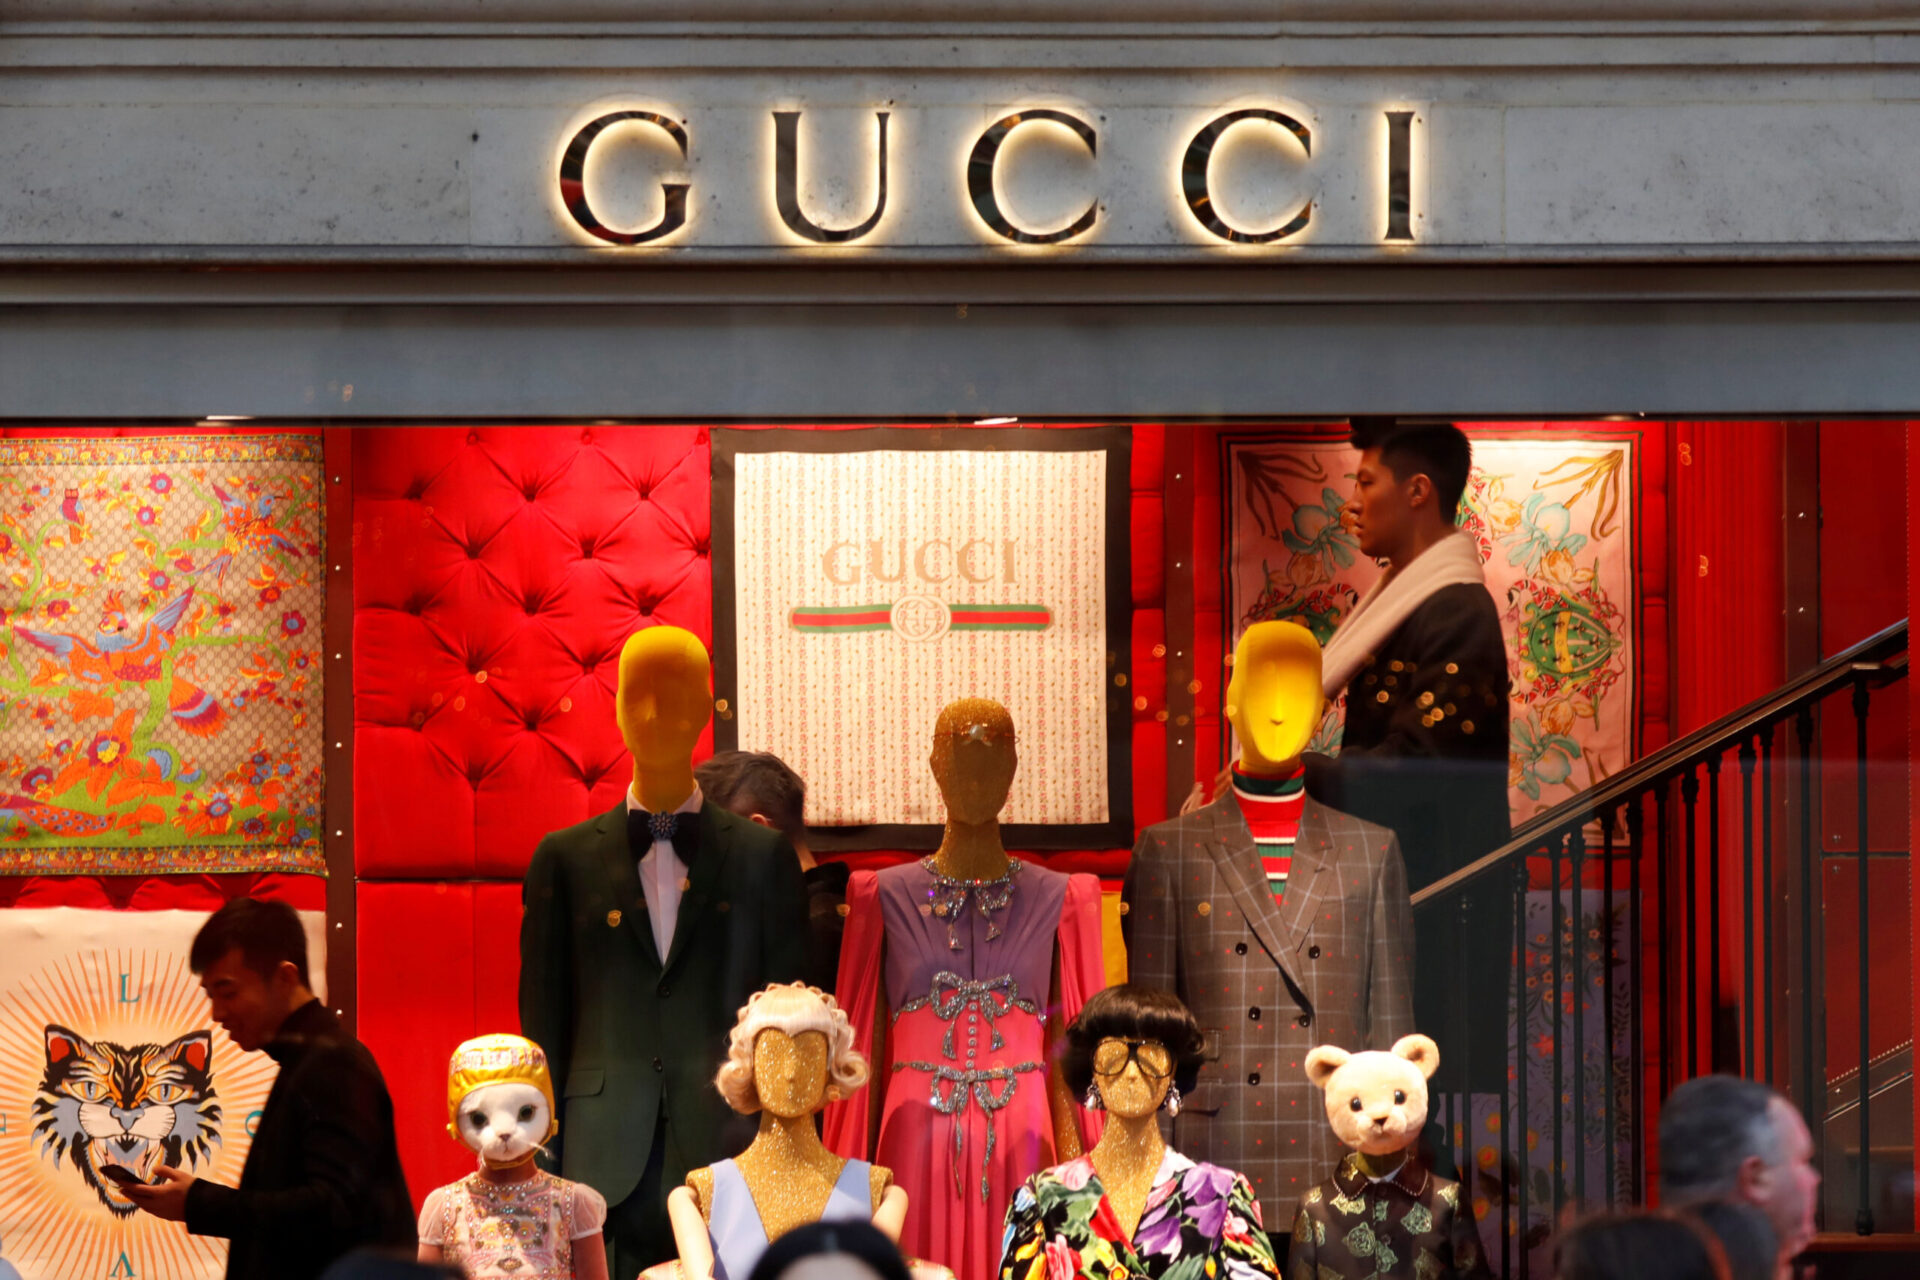 Gucci shop on Rodeo drive  Stock Photos ~ Creative Market